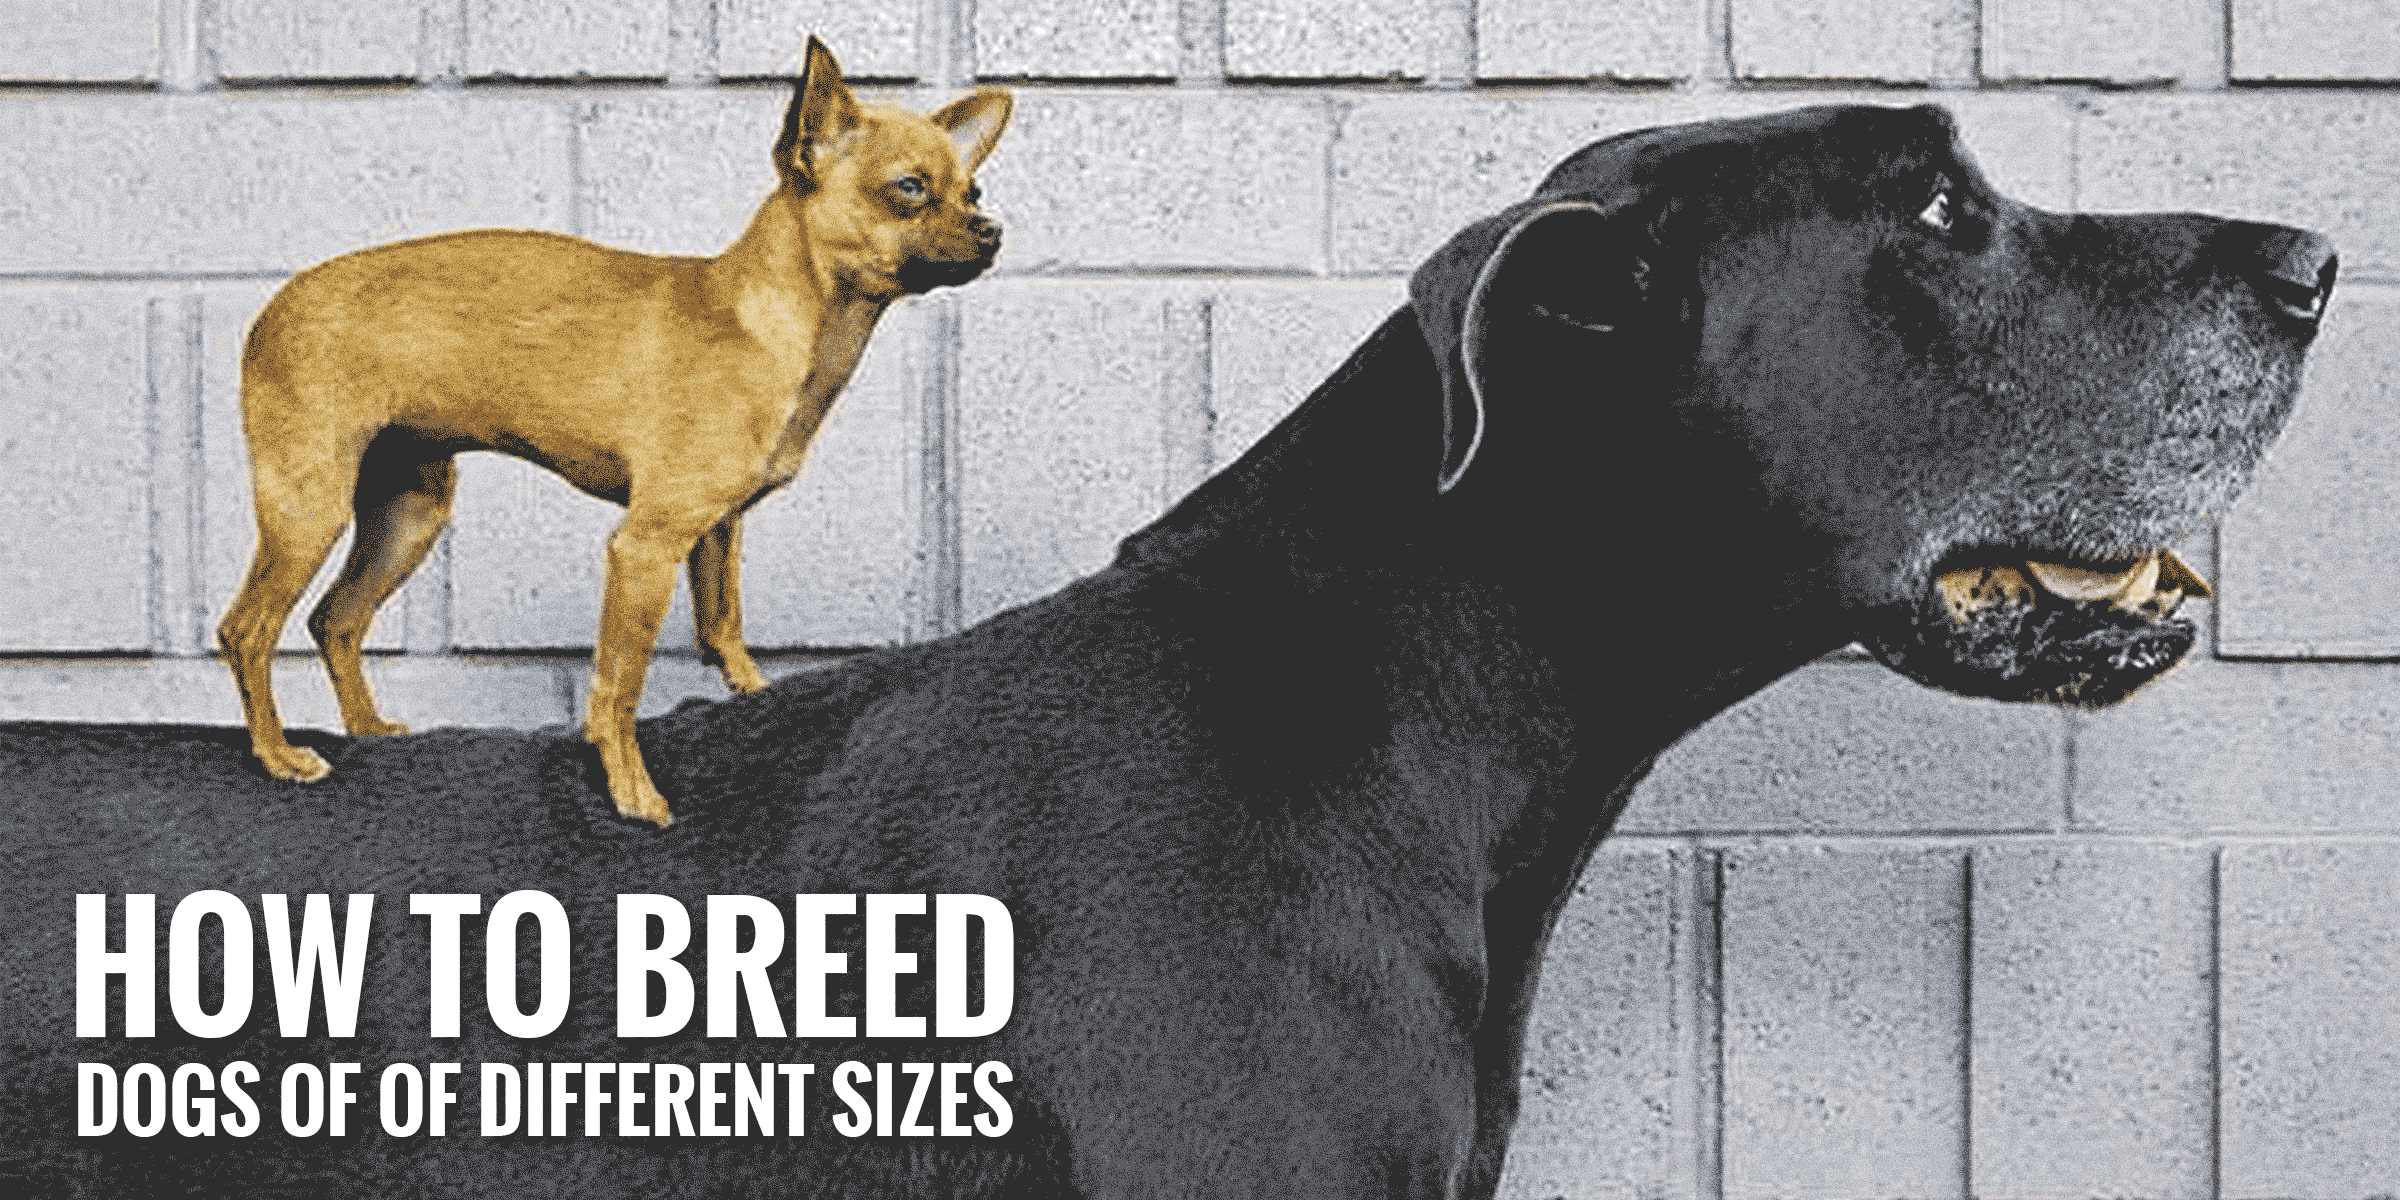 How to Breed Dogs of Different Sizes Safely?